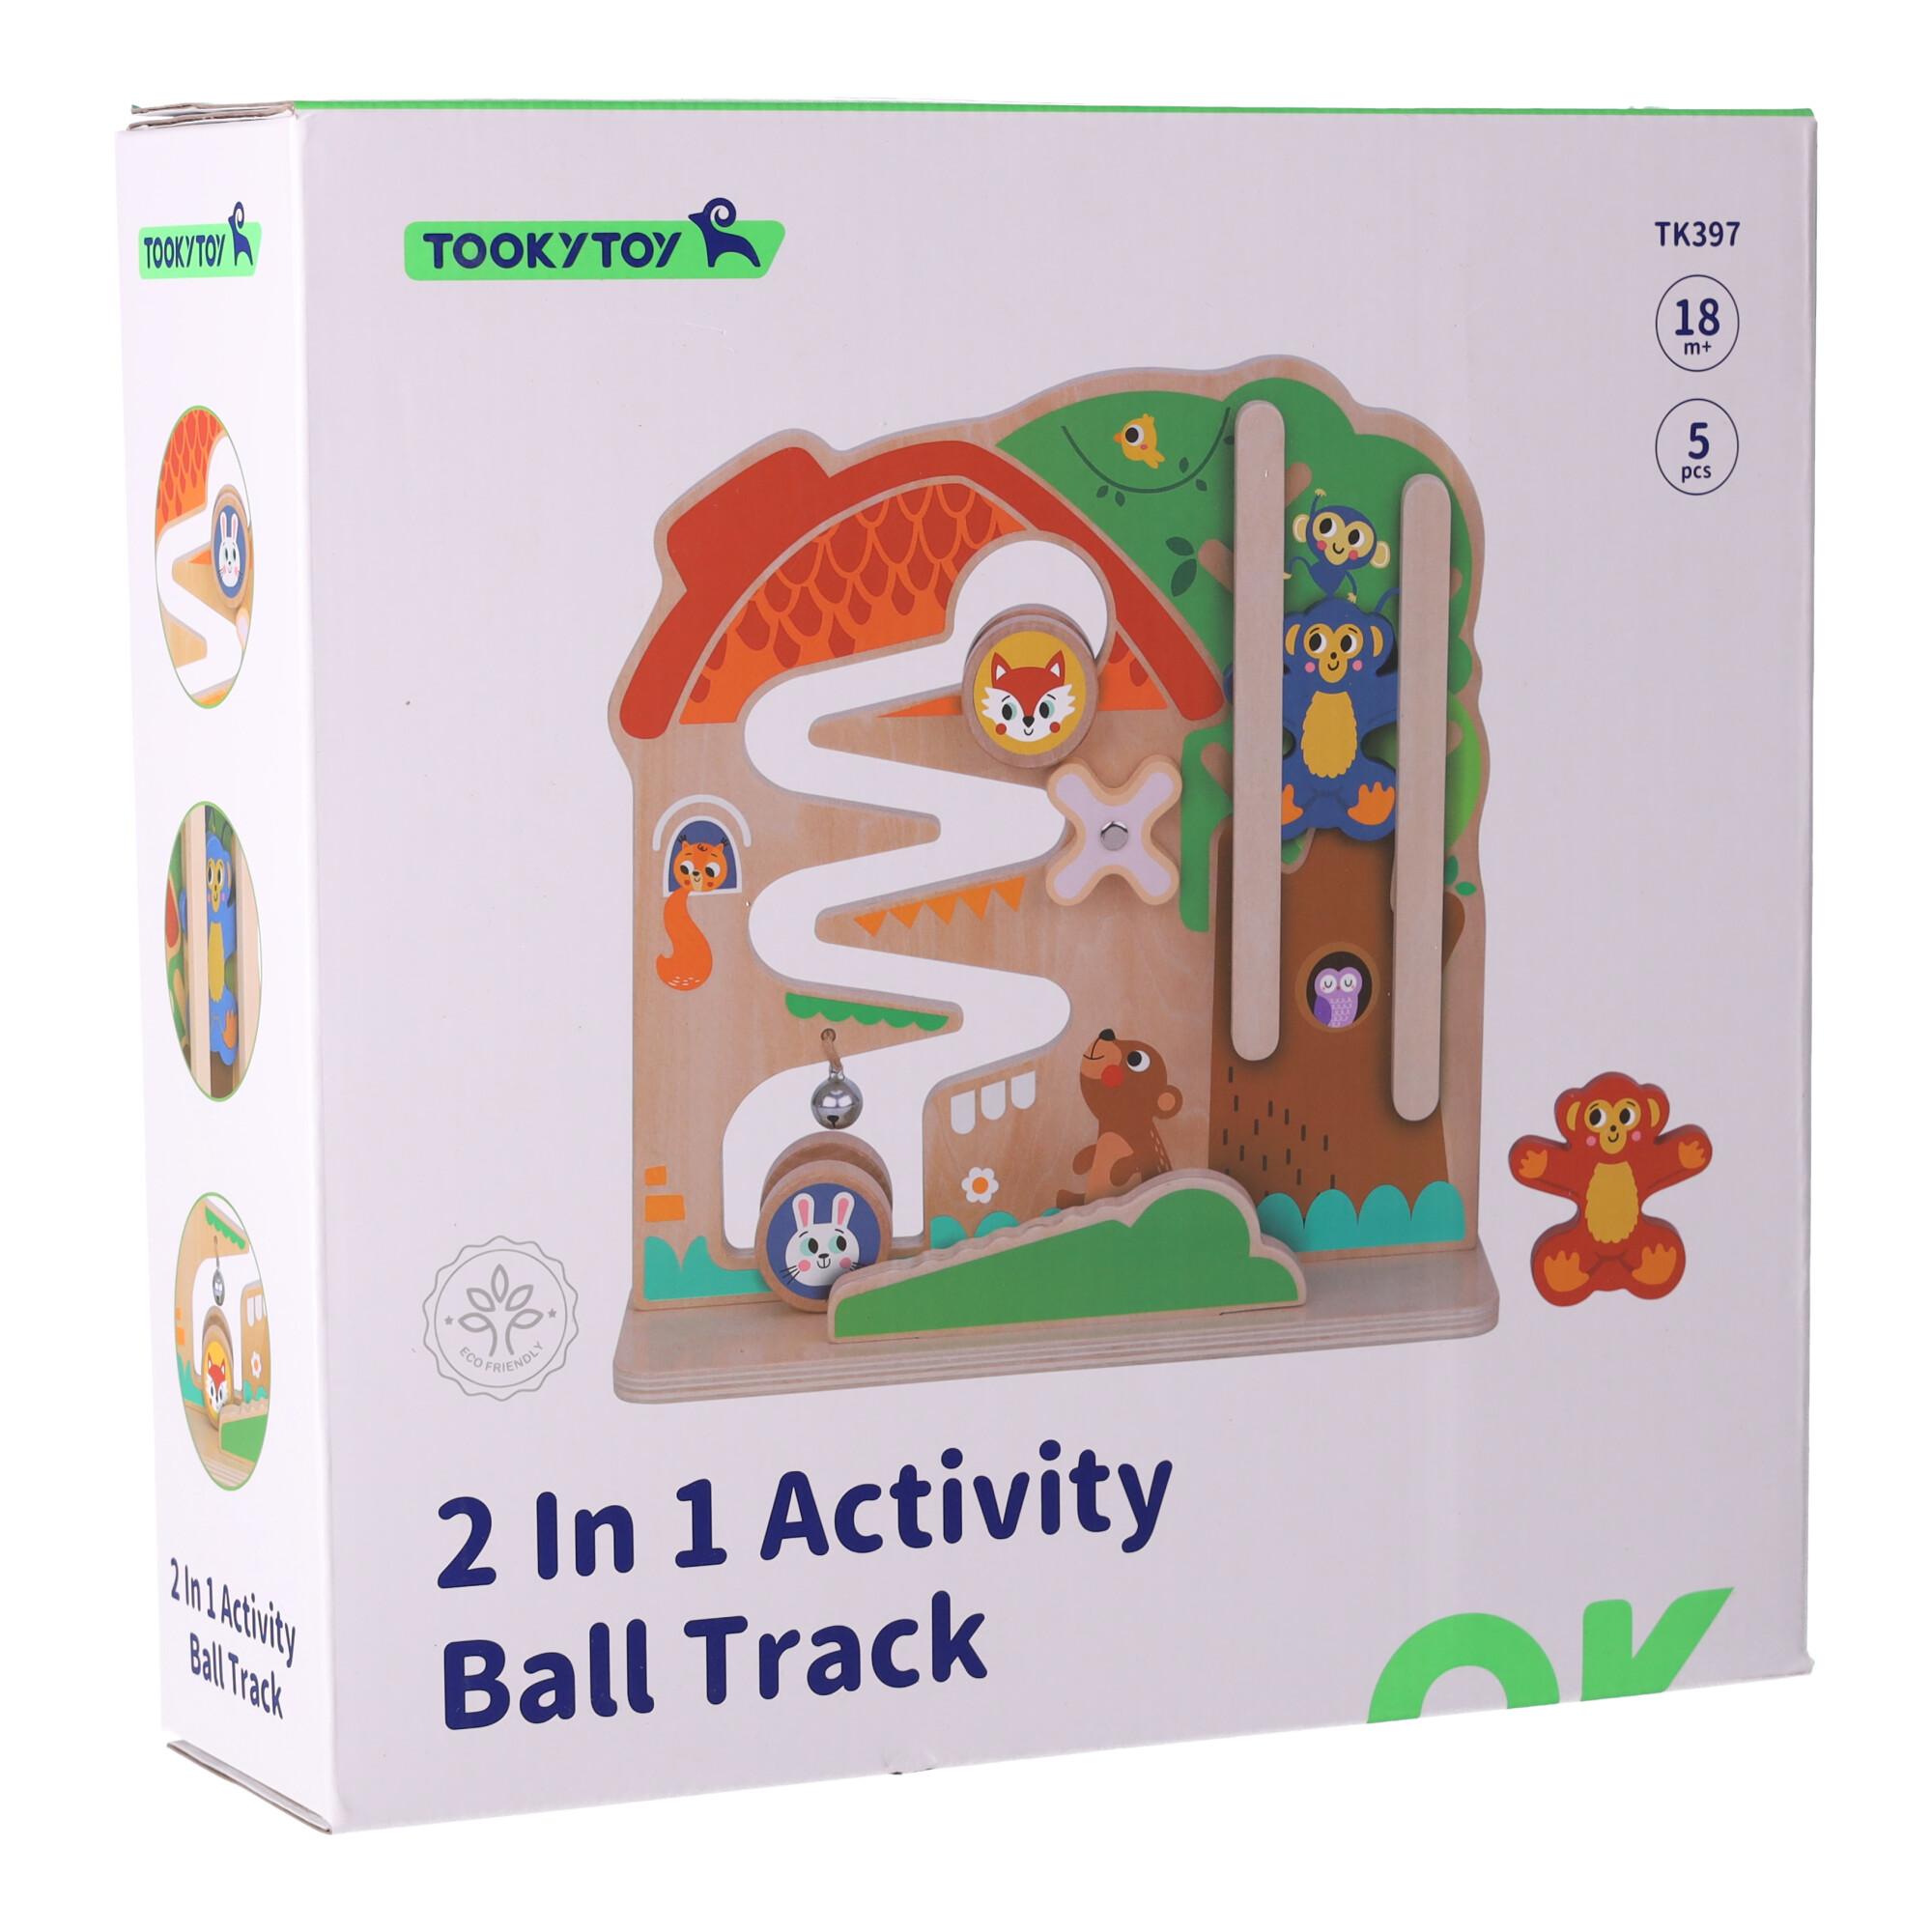 2 In 1 Activity Ball Track